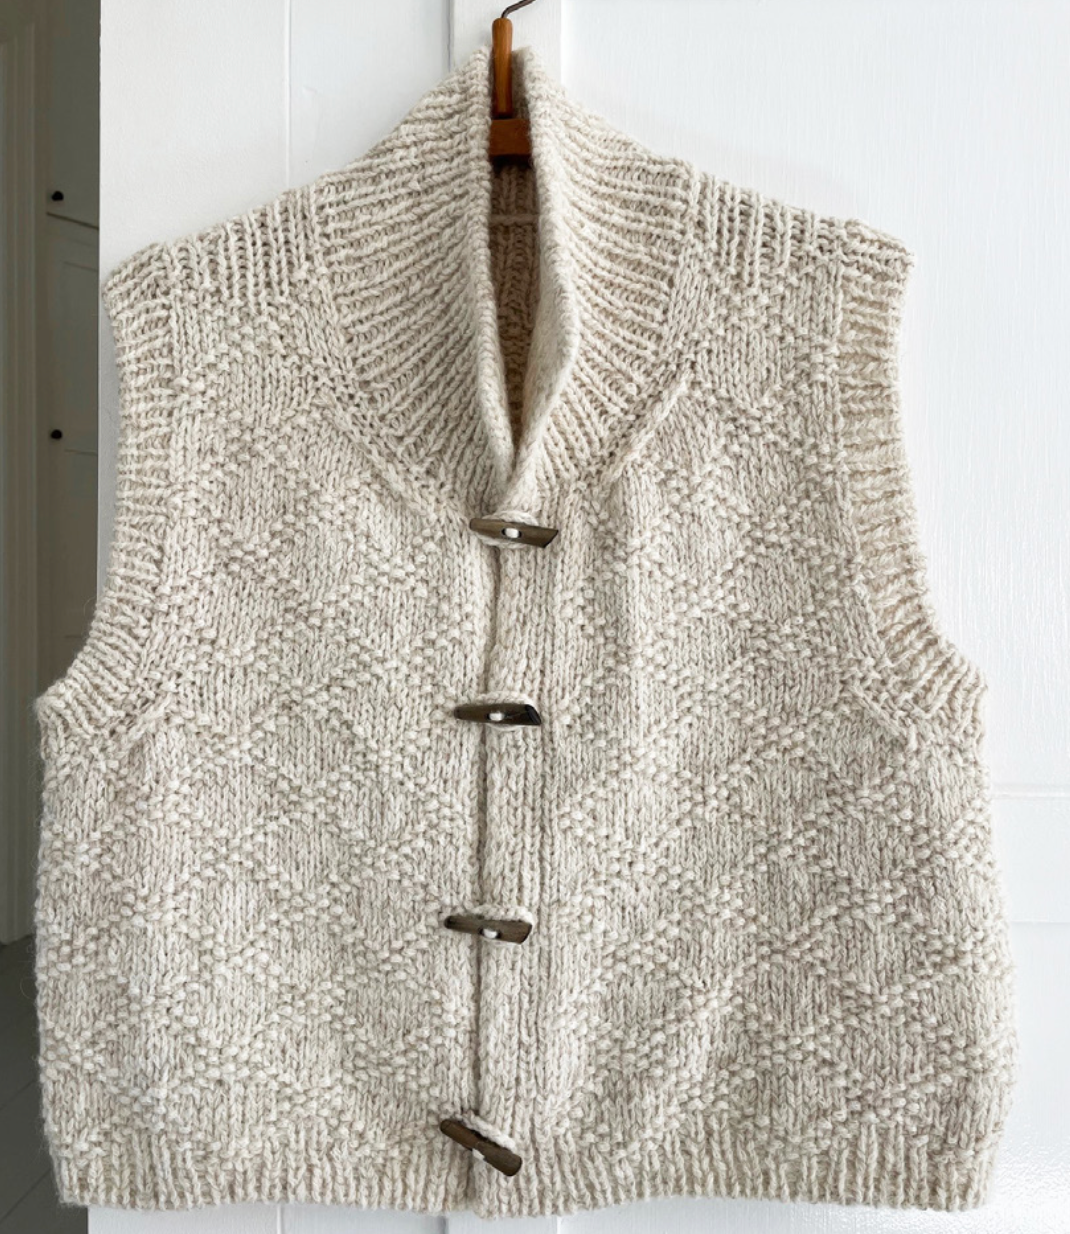 Texture Vest Pattern by Helga Isager Isager